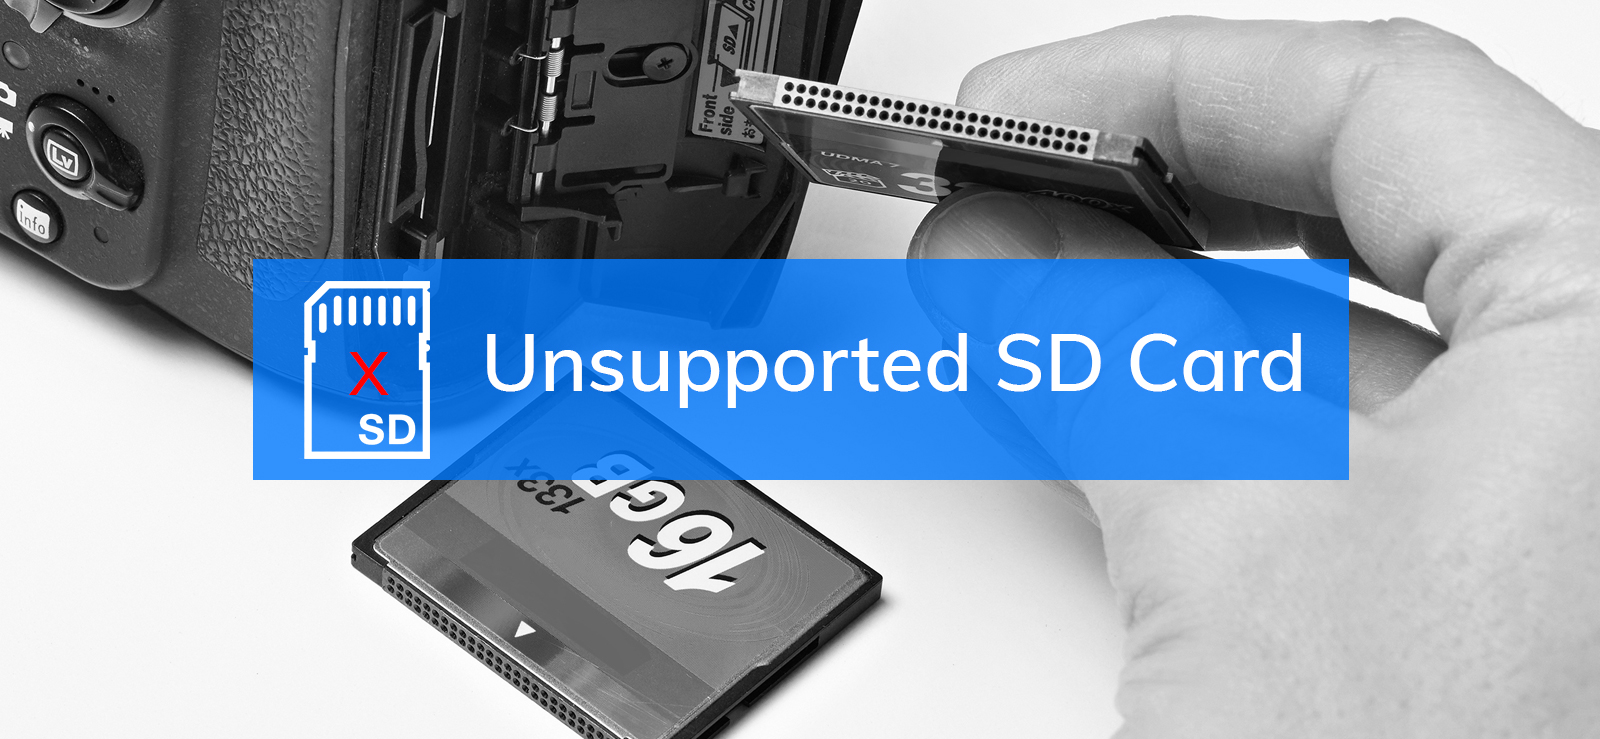 SD Card Is Blank or Has Unsupported File System – How to Recover Data?